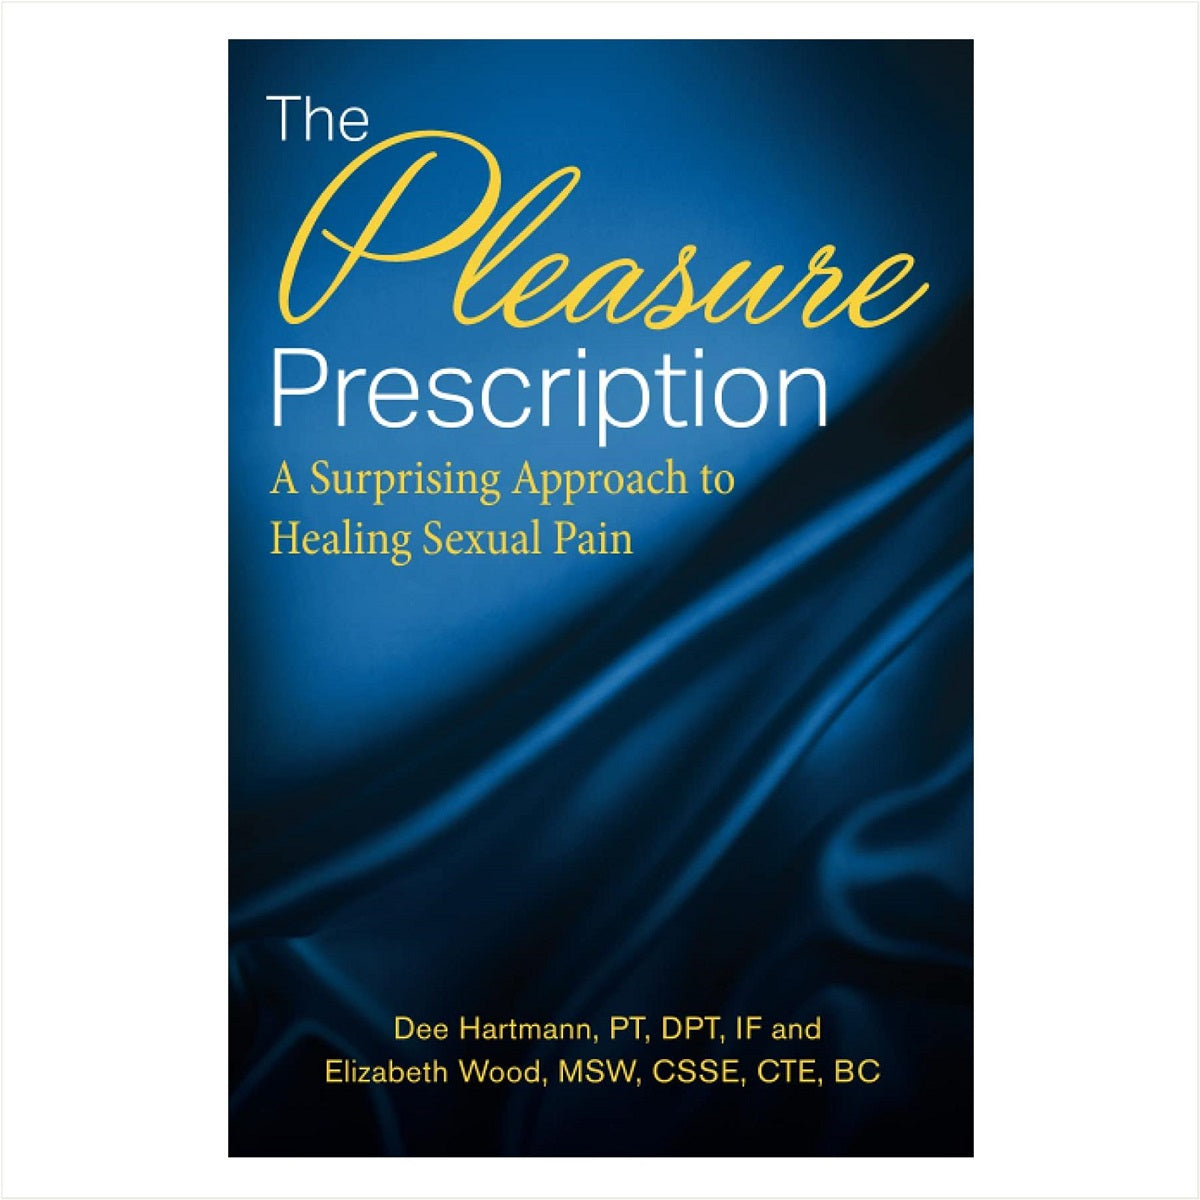 The Book: "The Pleasure Prescription- A Surprising Approach to Healing Sexual Pain" by Dee Hartmann and Elizabeth Wood